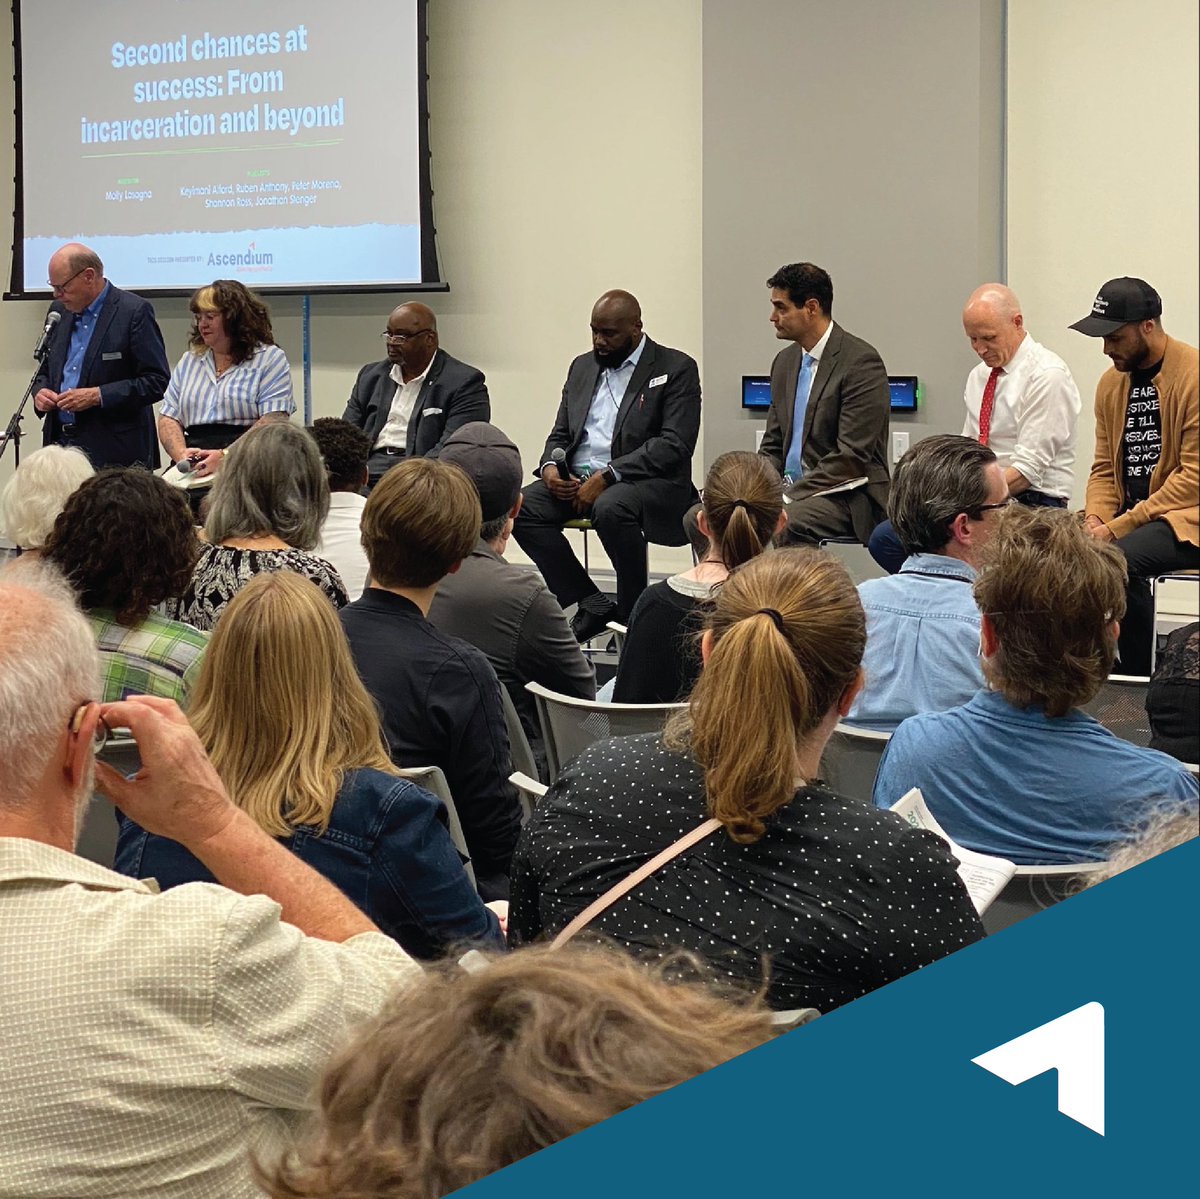 Missed #AscendiumEP at #CapTimesIdeaFest? We’ve got you covered. A recording of the session “Second Chances at Success: From Incarceration to Graduation and Beyond” is now available to watch online! bit.ly/3EXQ97S

#HigherEdinPrison
@CapTimes